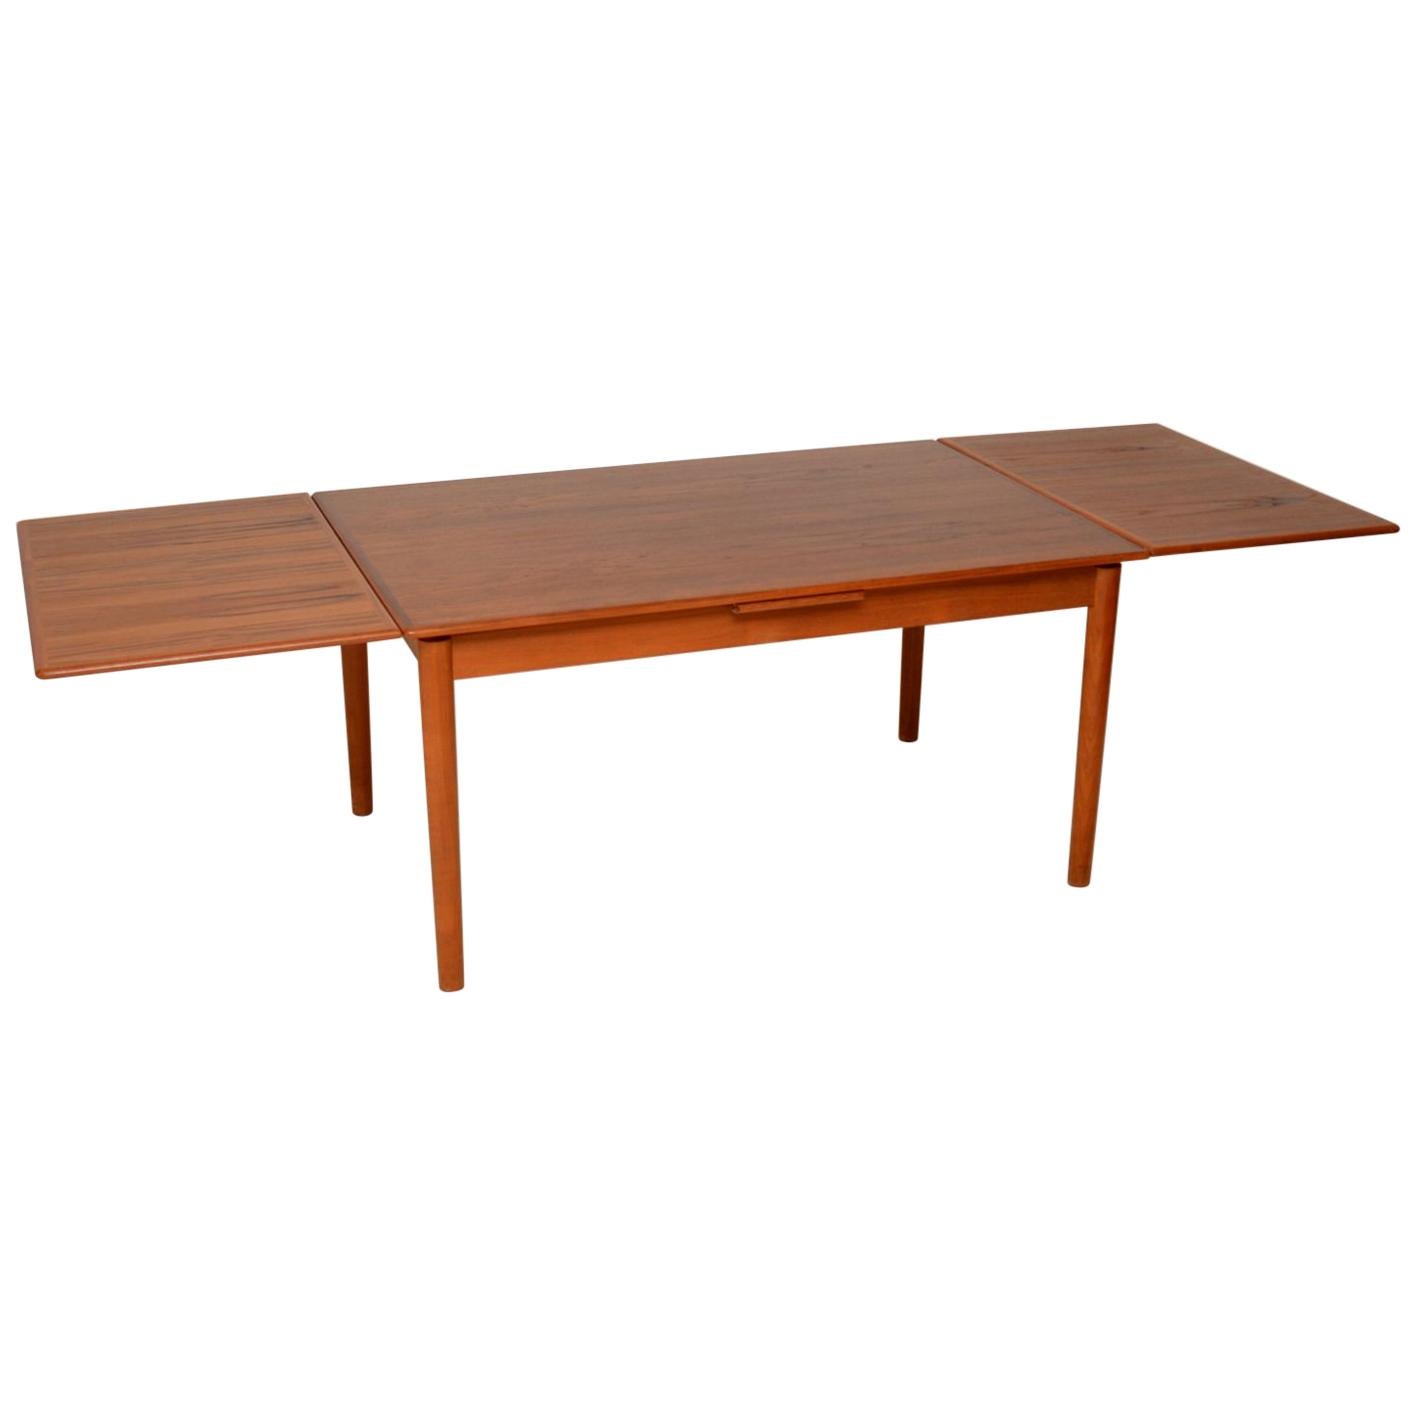 A beautiful and top quality vintage Danish extending dining table in teak, dating from the 1960s-1970s. This is really well made, it has two-drawer leaves that can be pulled out to extend this to a ten-seat. It is also possible to pullout / pull-out